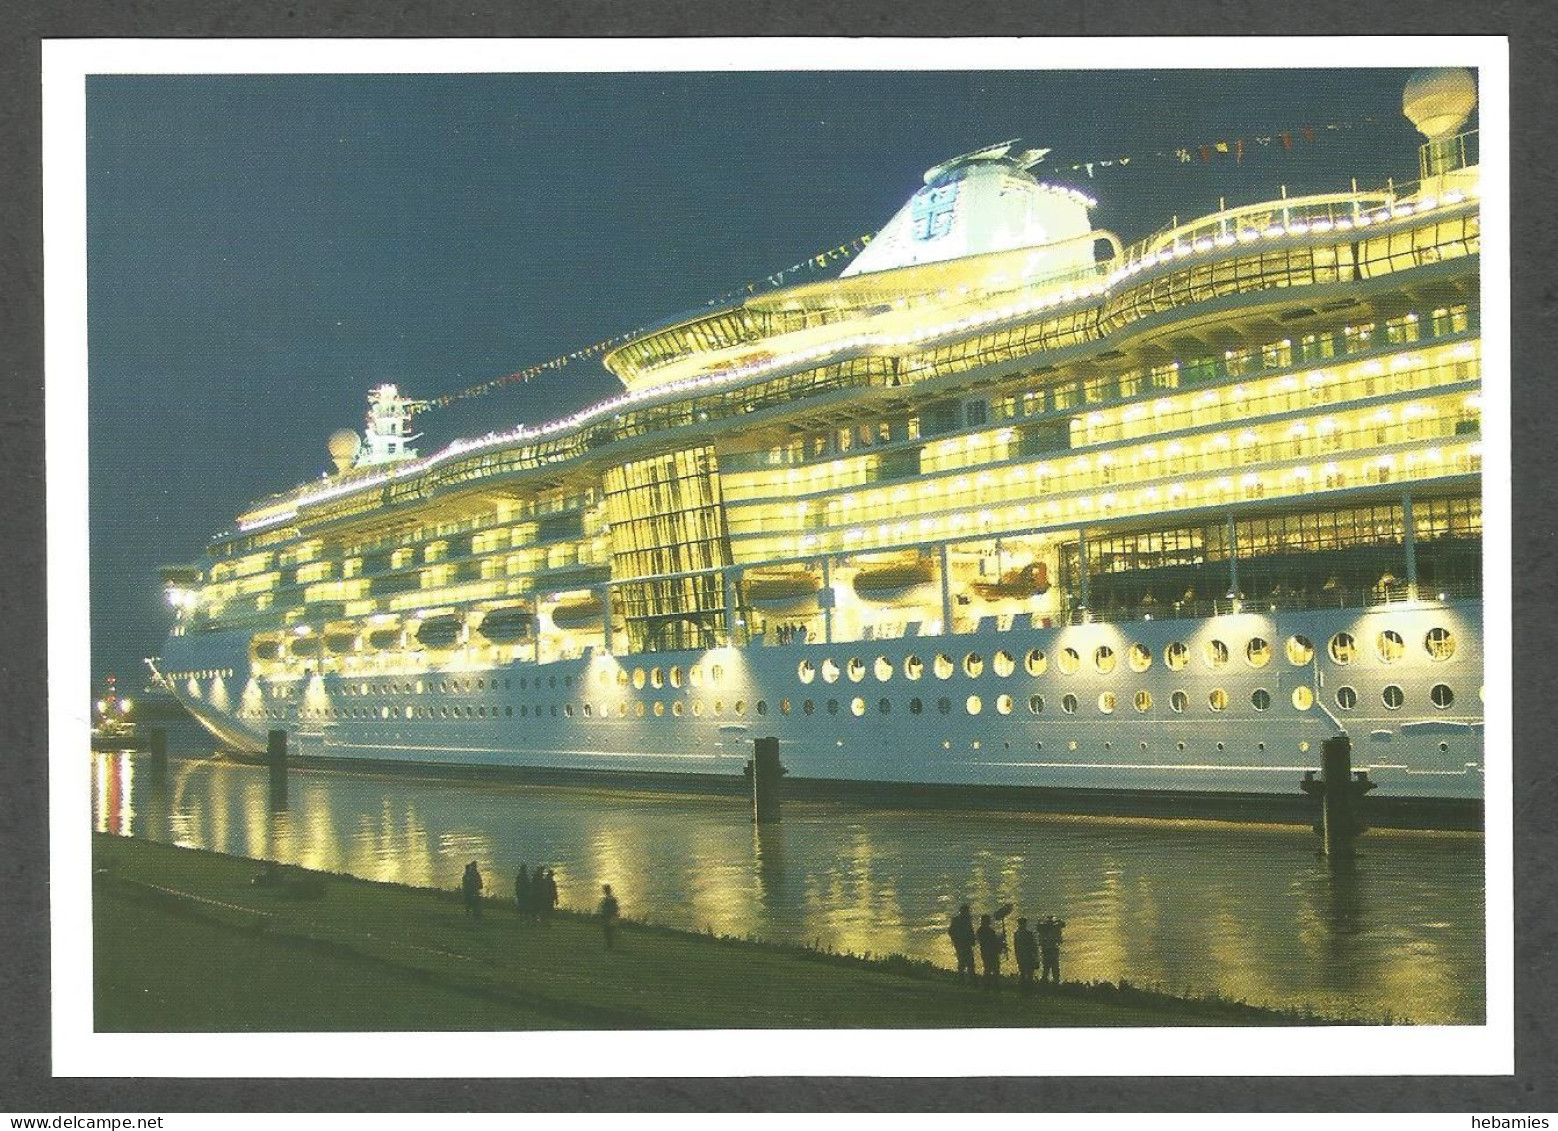 Cruise Liner M/S BRILLIANCE Of The SEAS  - ROYAL CARIBBEAN INTERNATIONAL Shipping Company - - Ferries